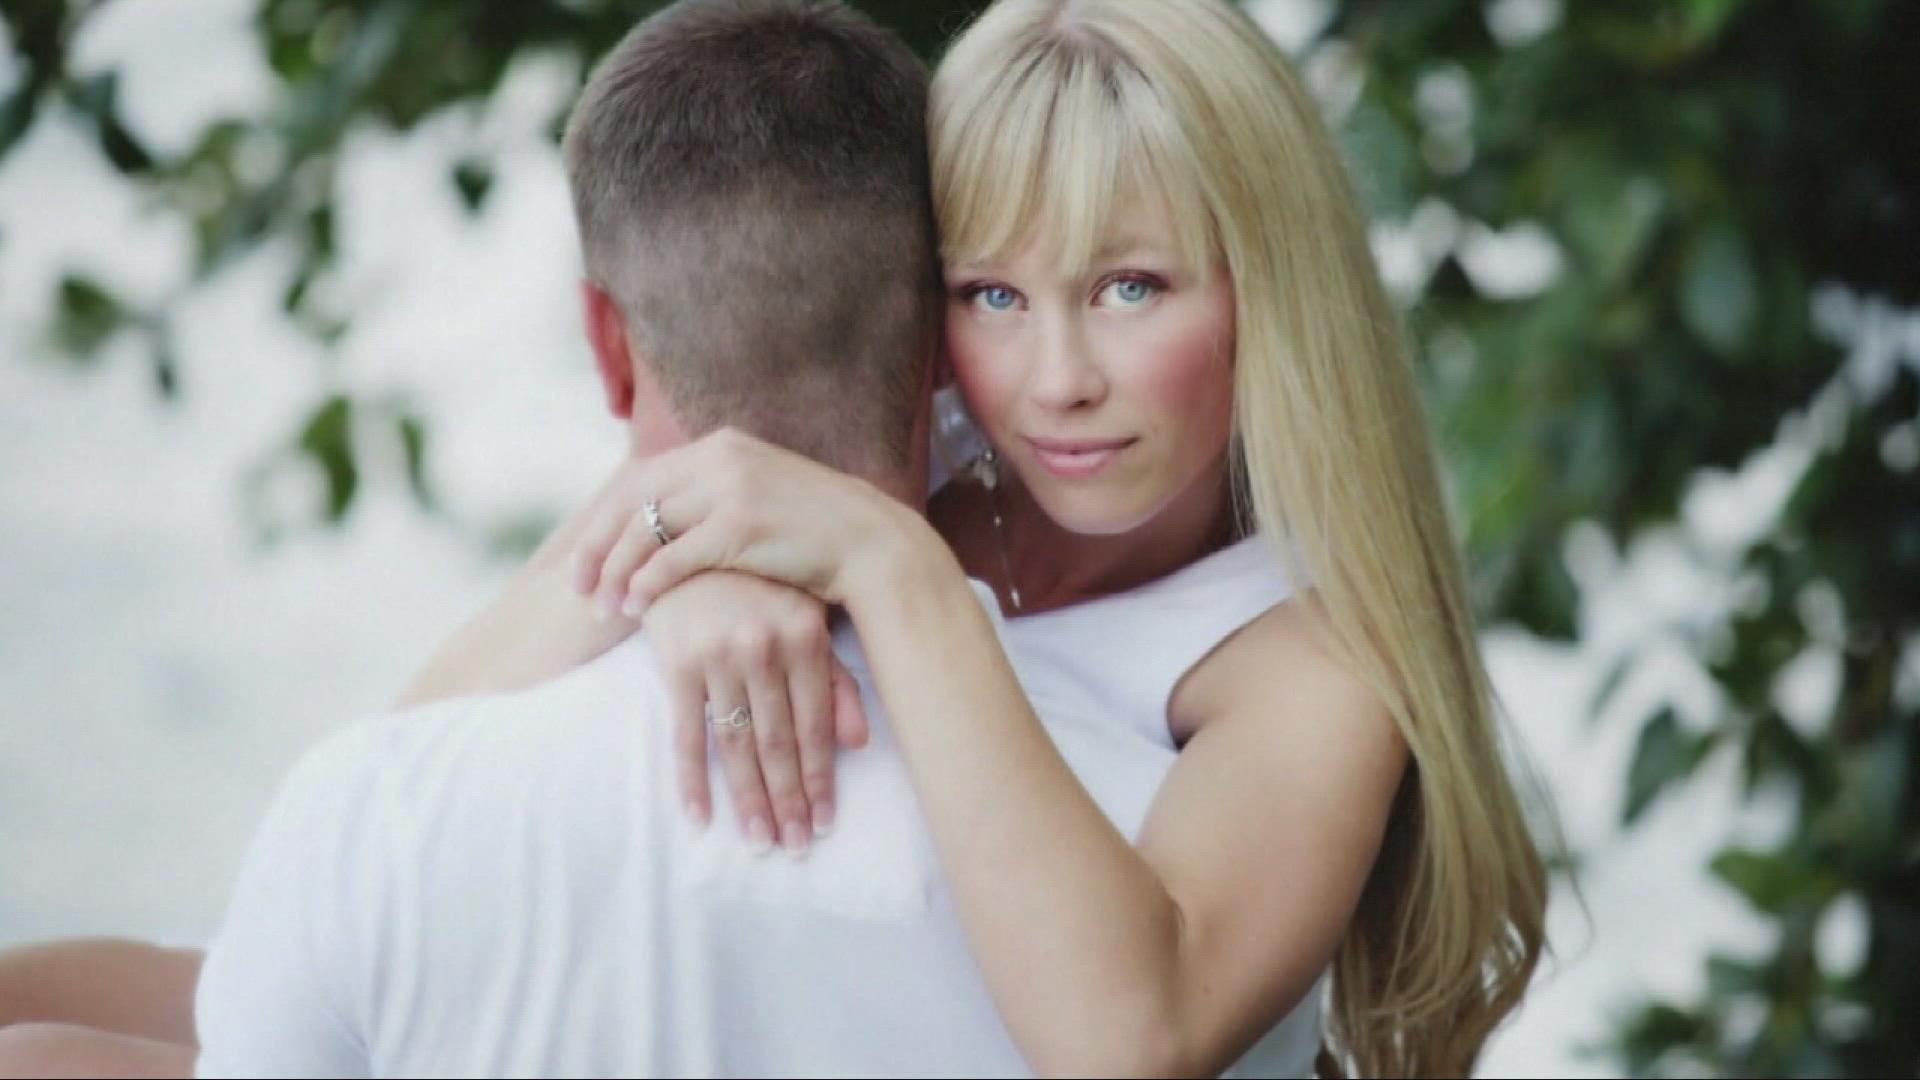 Sherri Papini sentencing: Federal prosecutors said Papini should be sentenced to eight months in prison for carefully faking her own kidnapping.